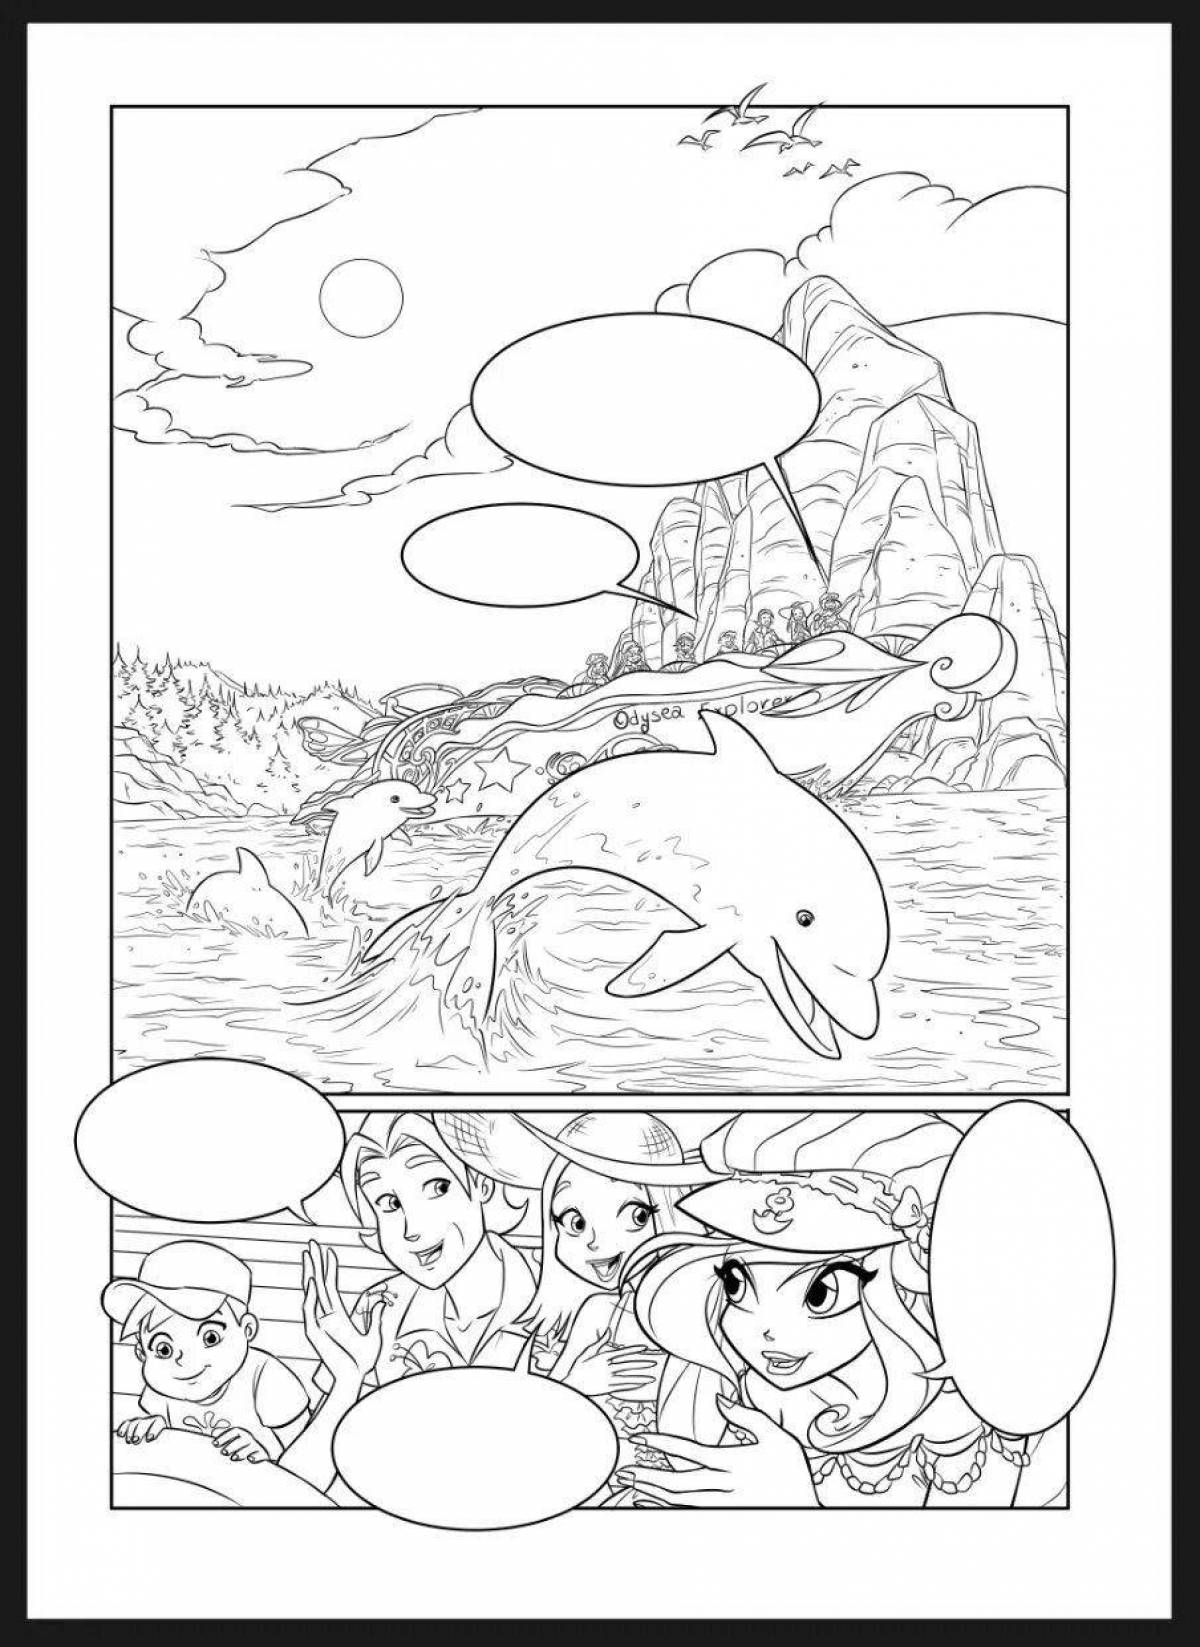 Exciting comic book coloring pages for girls